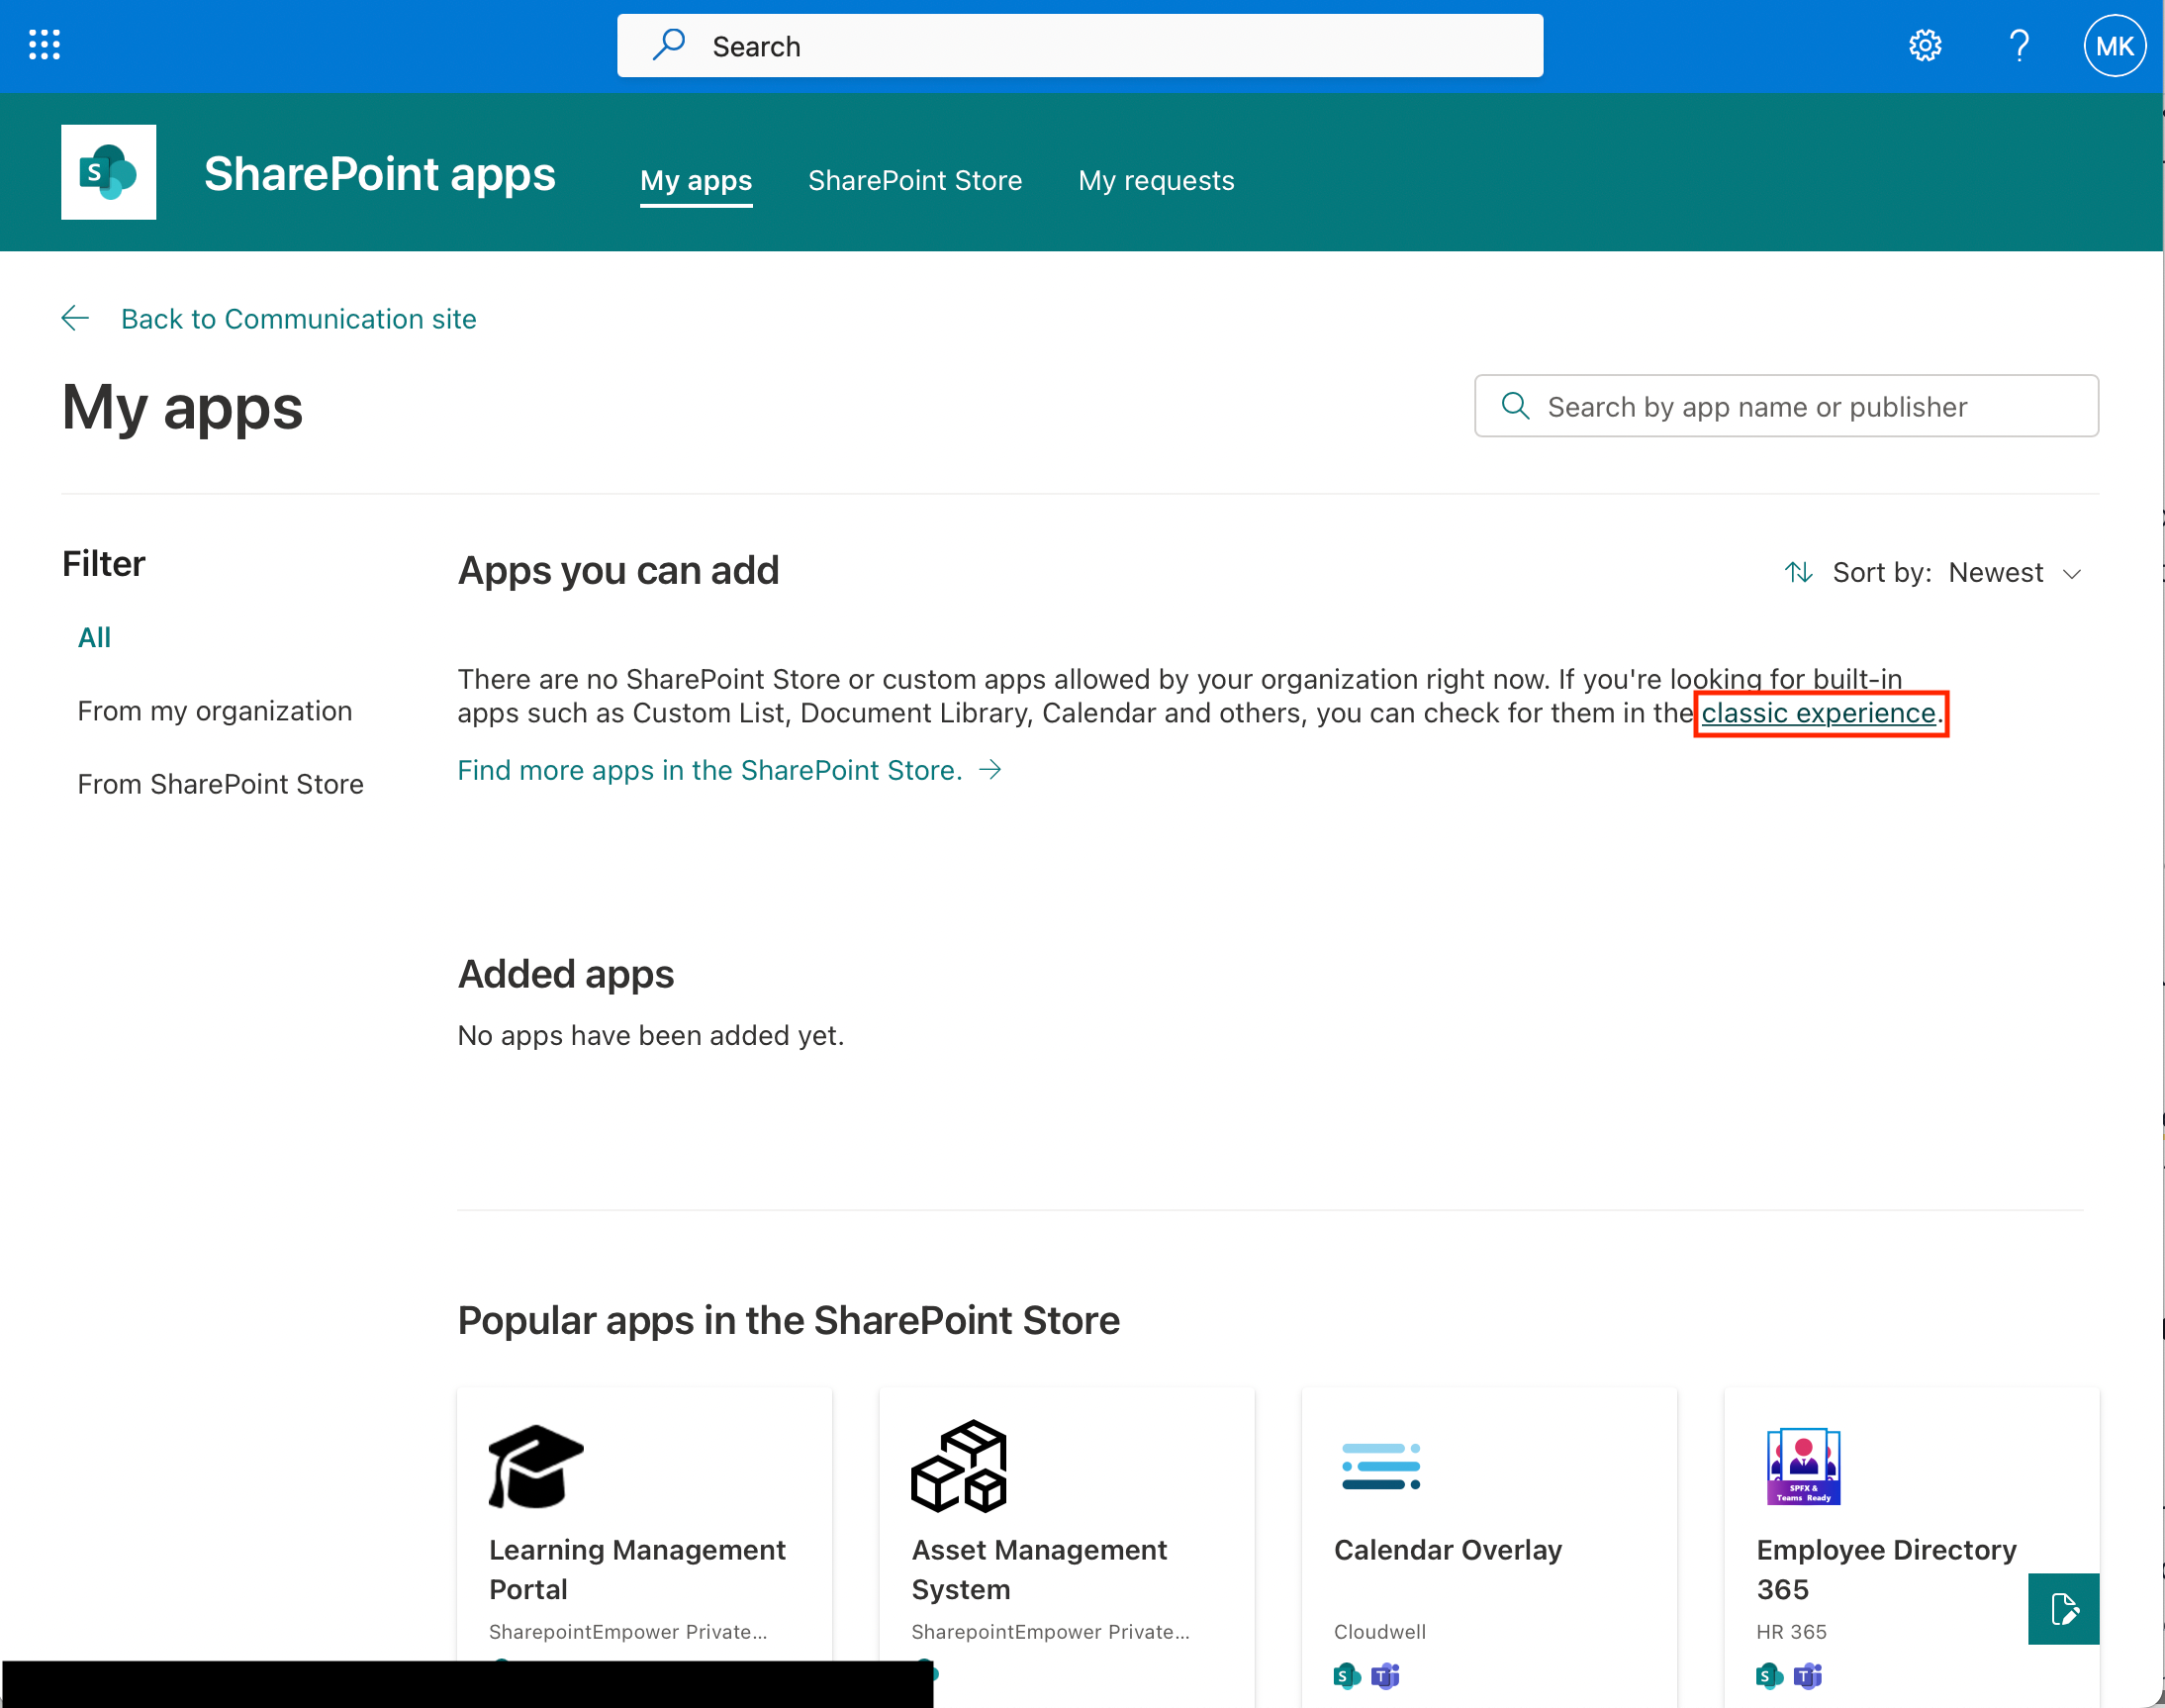 access classic experience apps in sharepoint